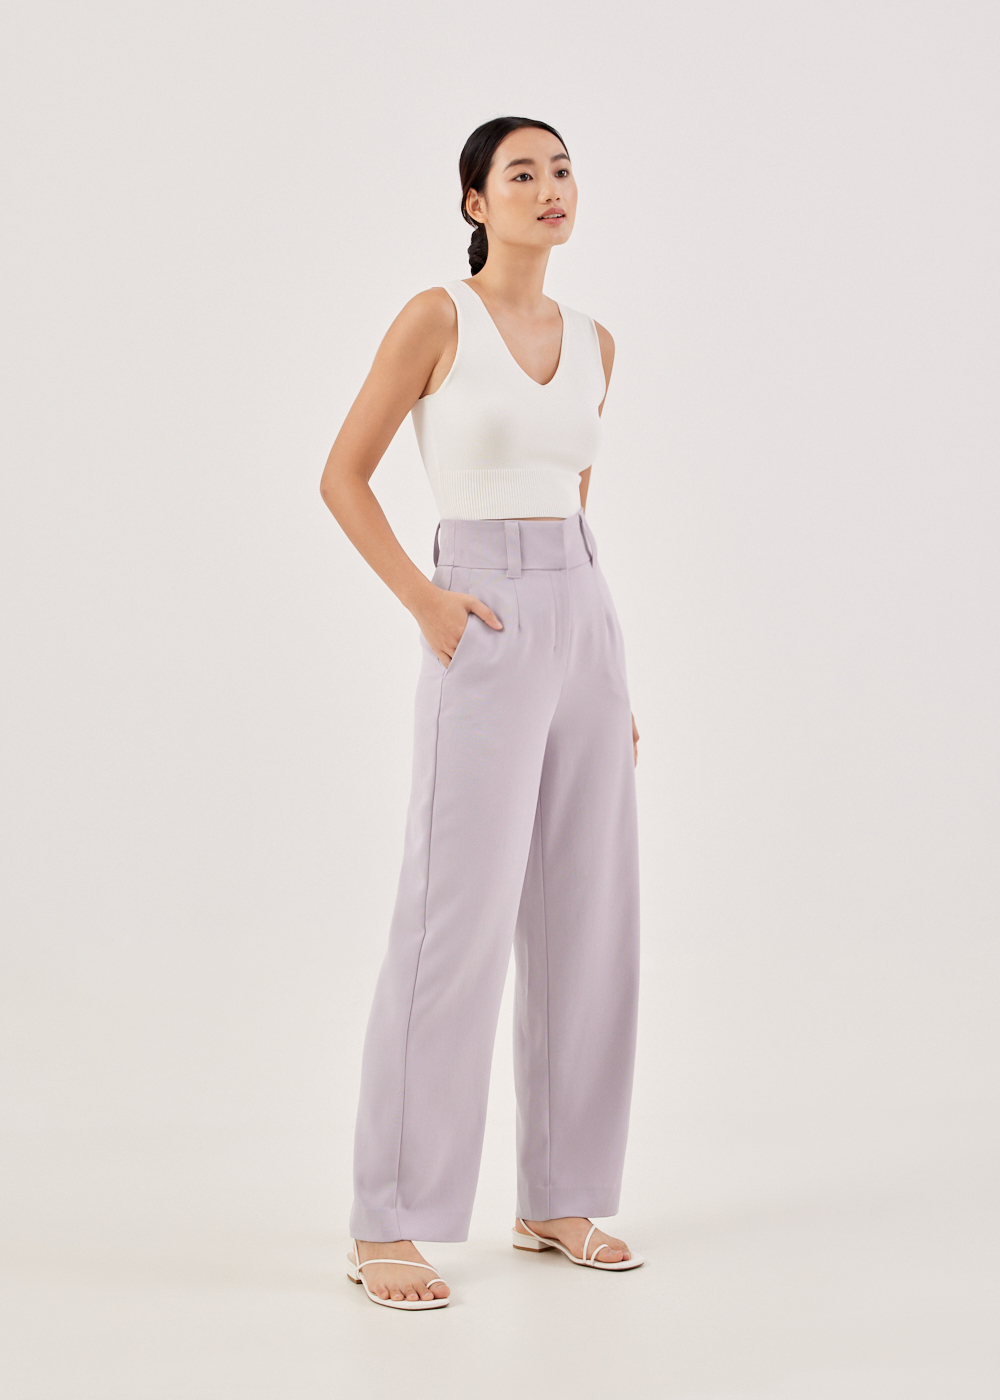 Women's Pants and Jeans | Shop women's slim cut, wide, bootcut, flared,  boyfriend and work pants and leggings online | | Pagani